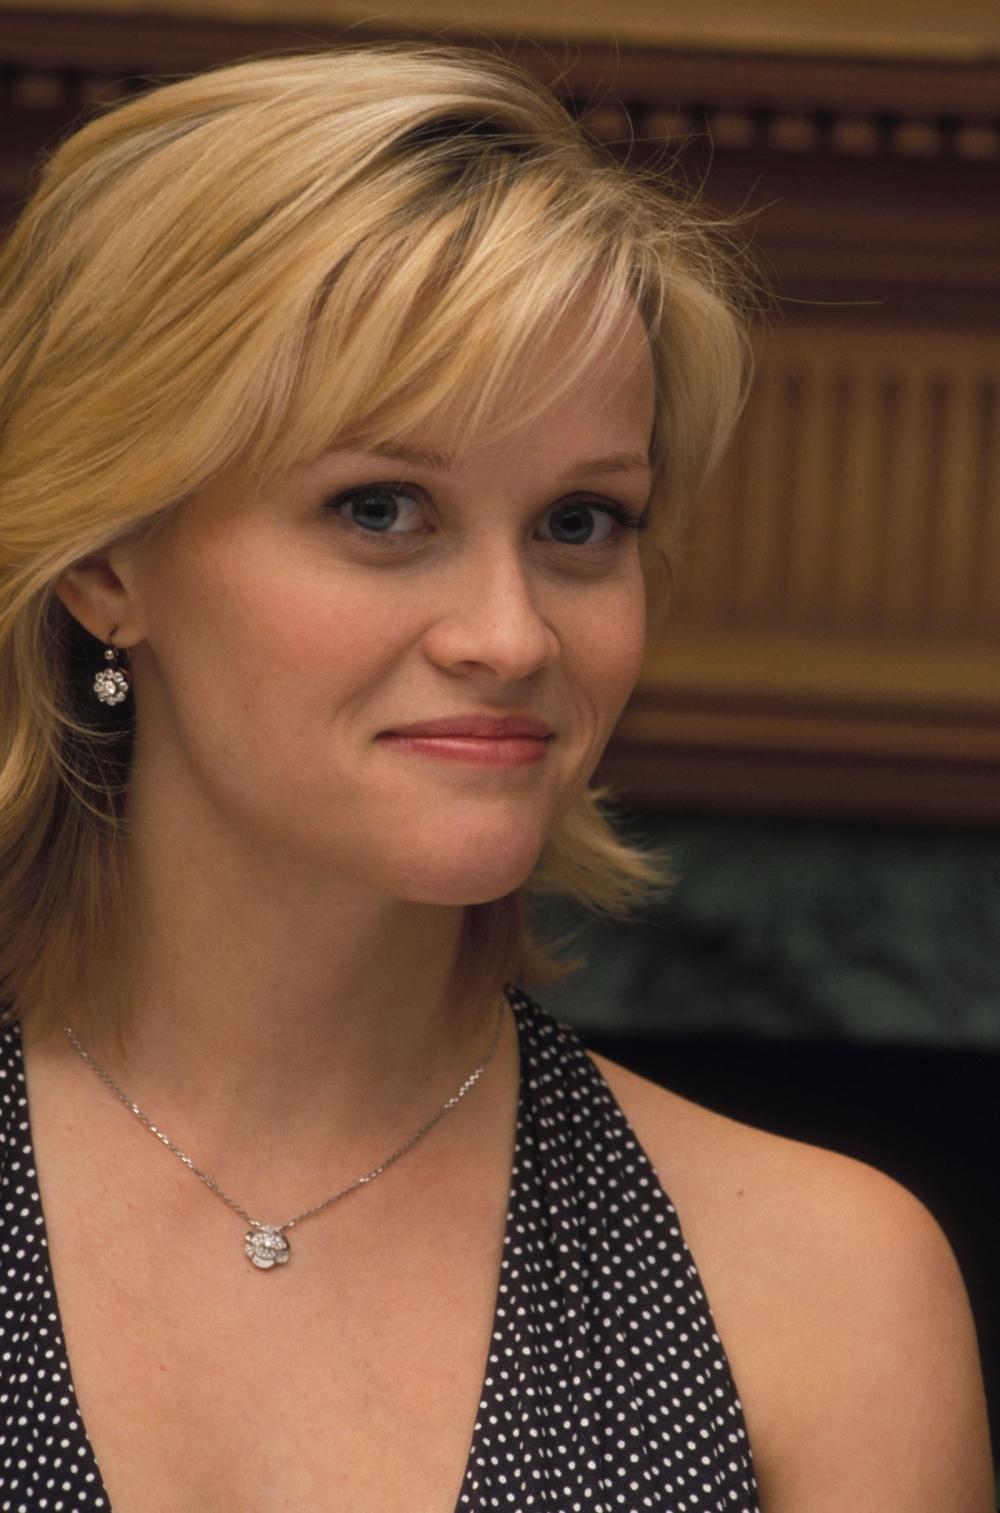 Photo №3777 Reese Witherspoon.